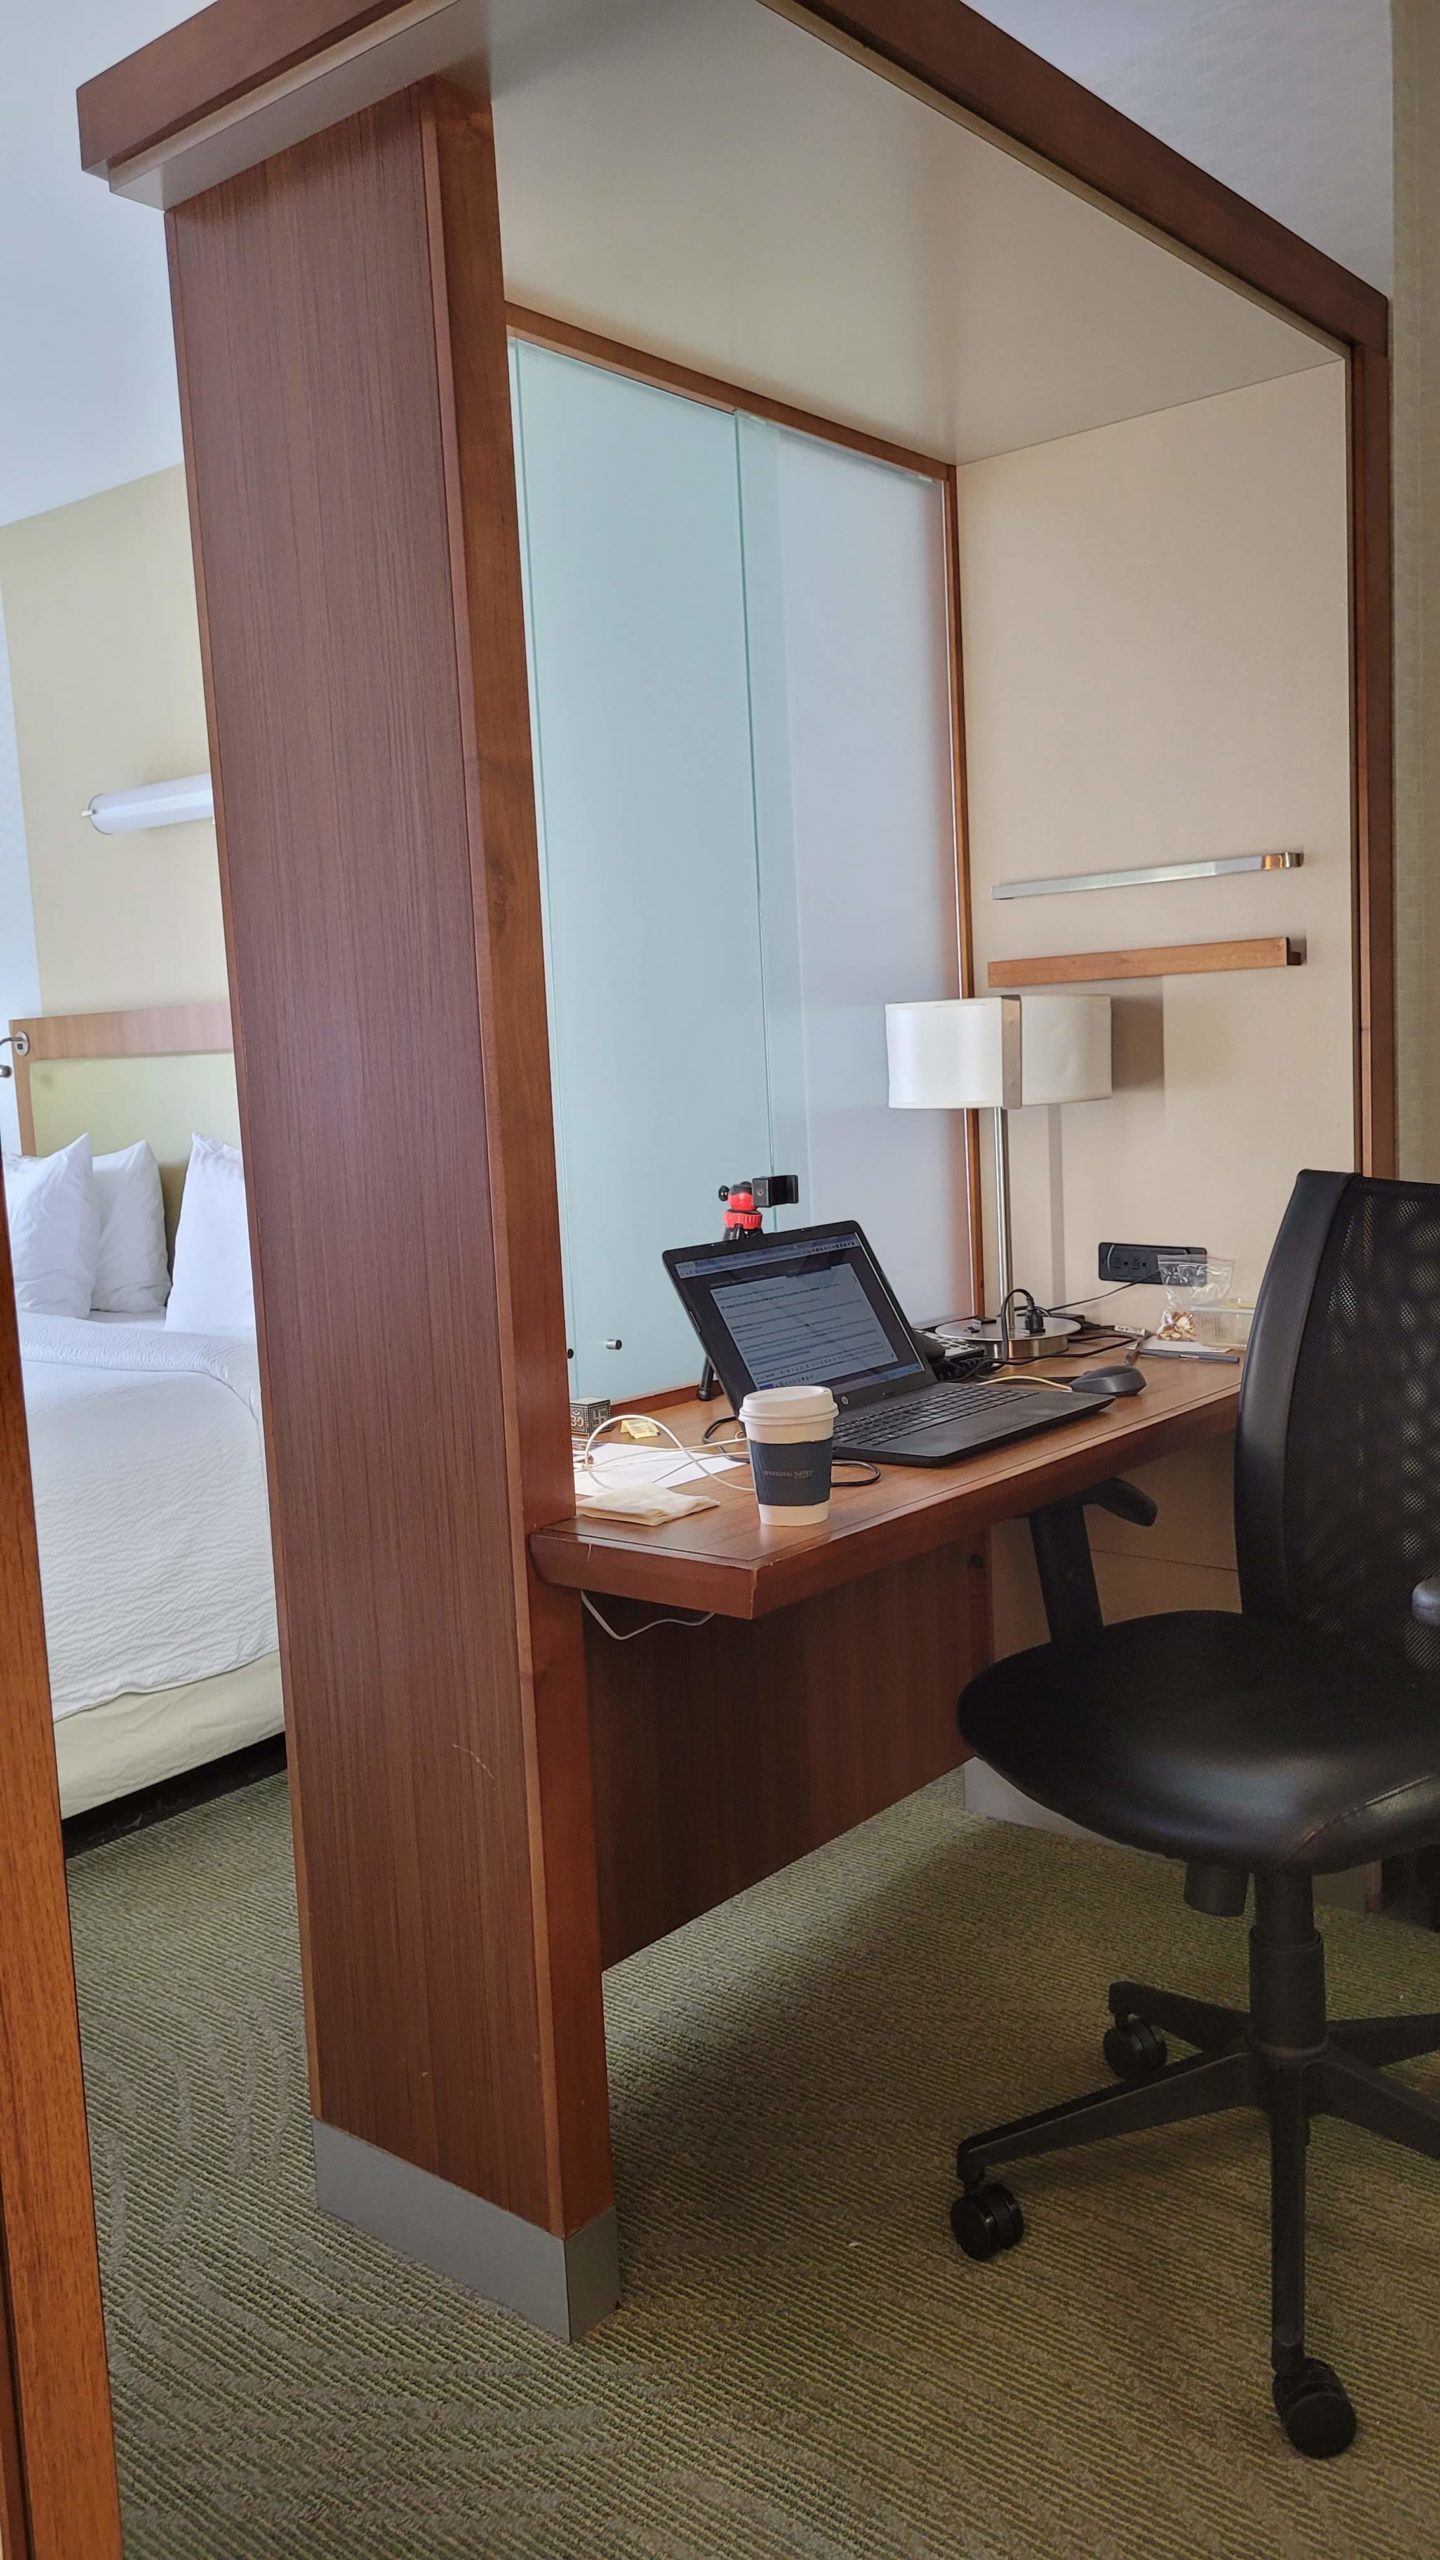 springhill suites by marriott, new york city - travel addict hack stayed